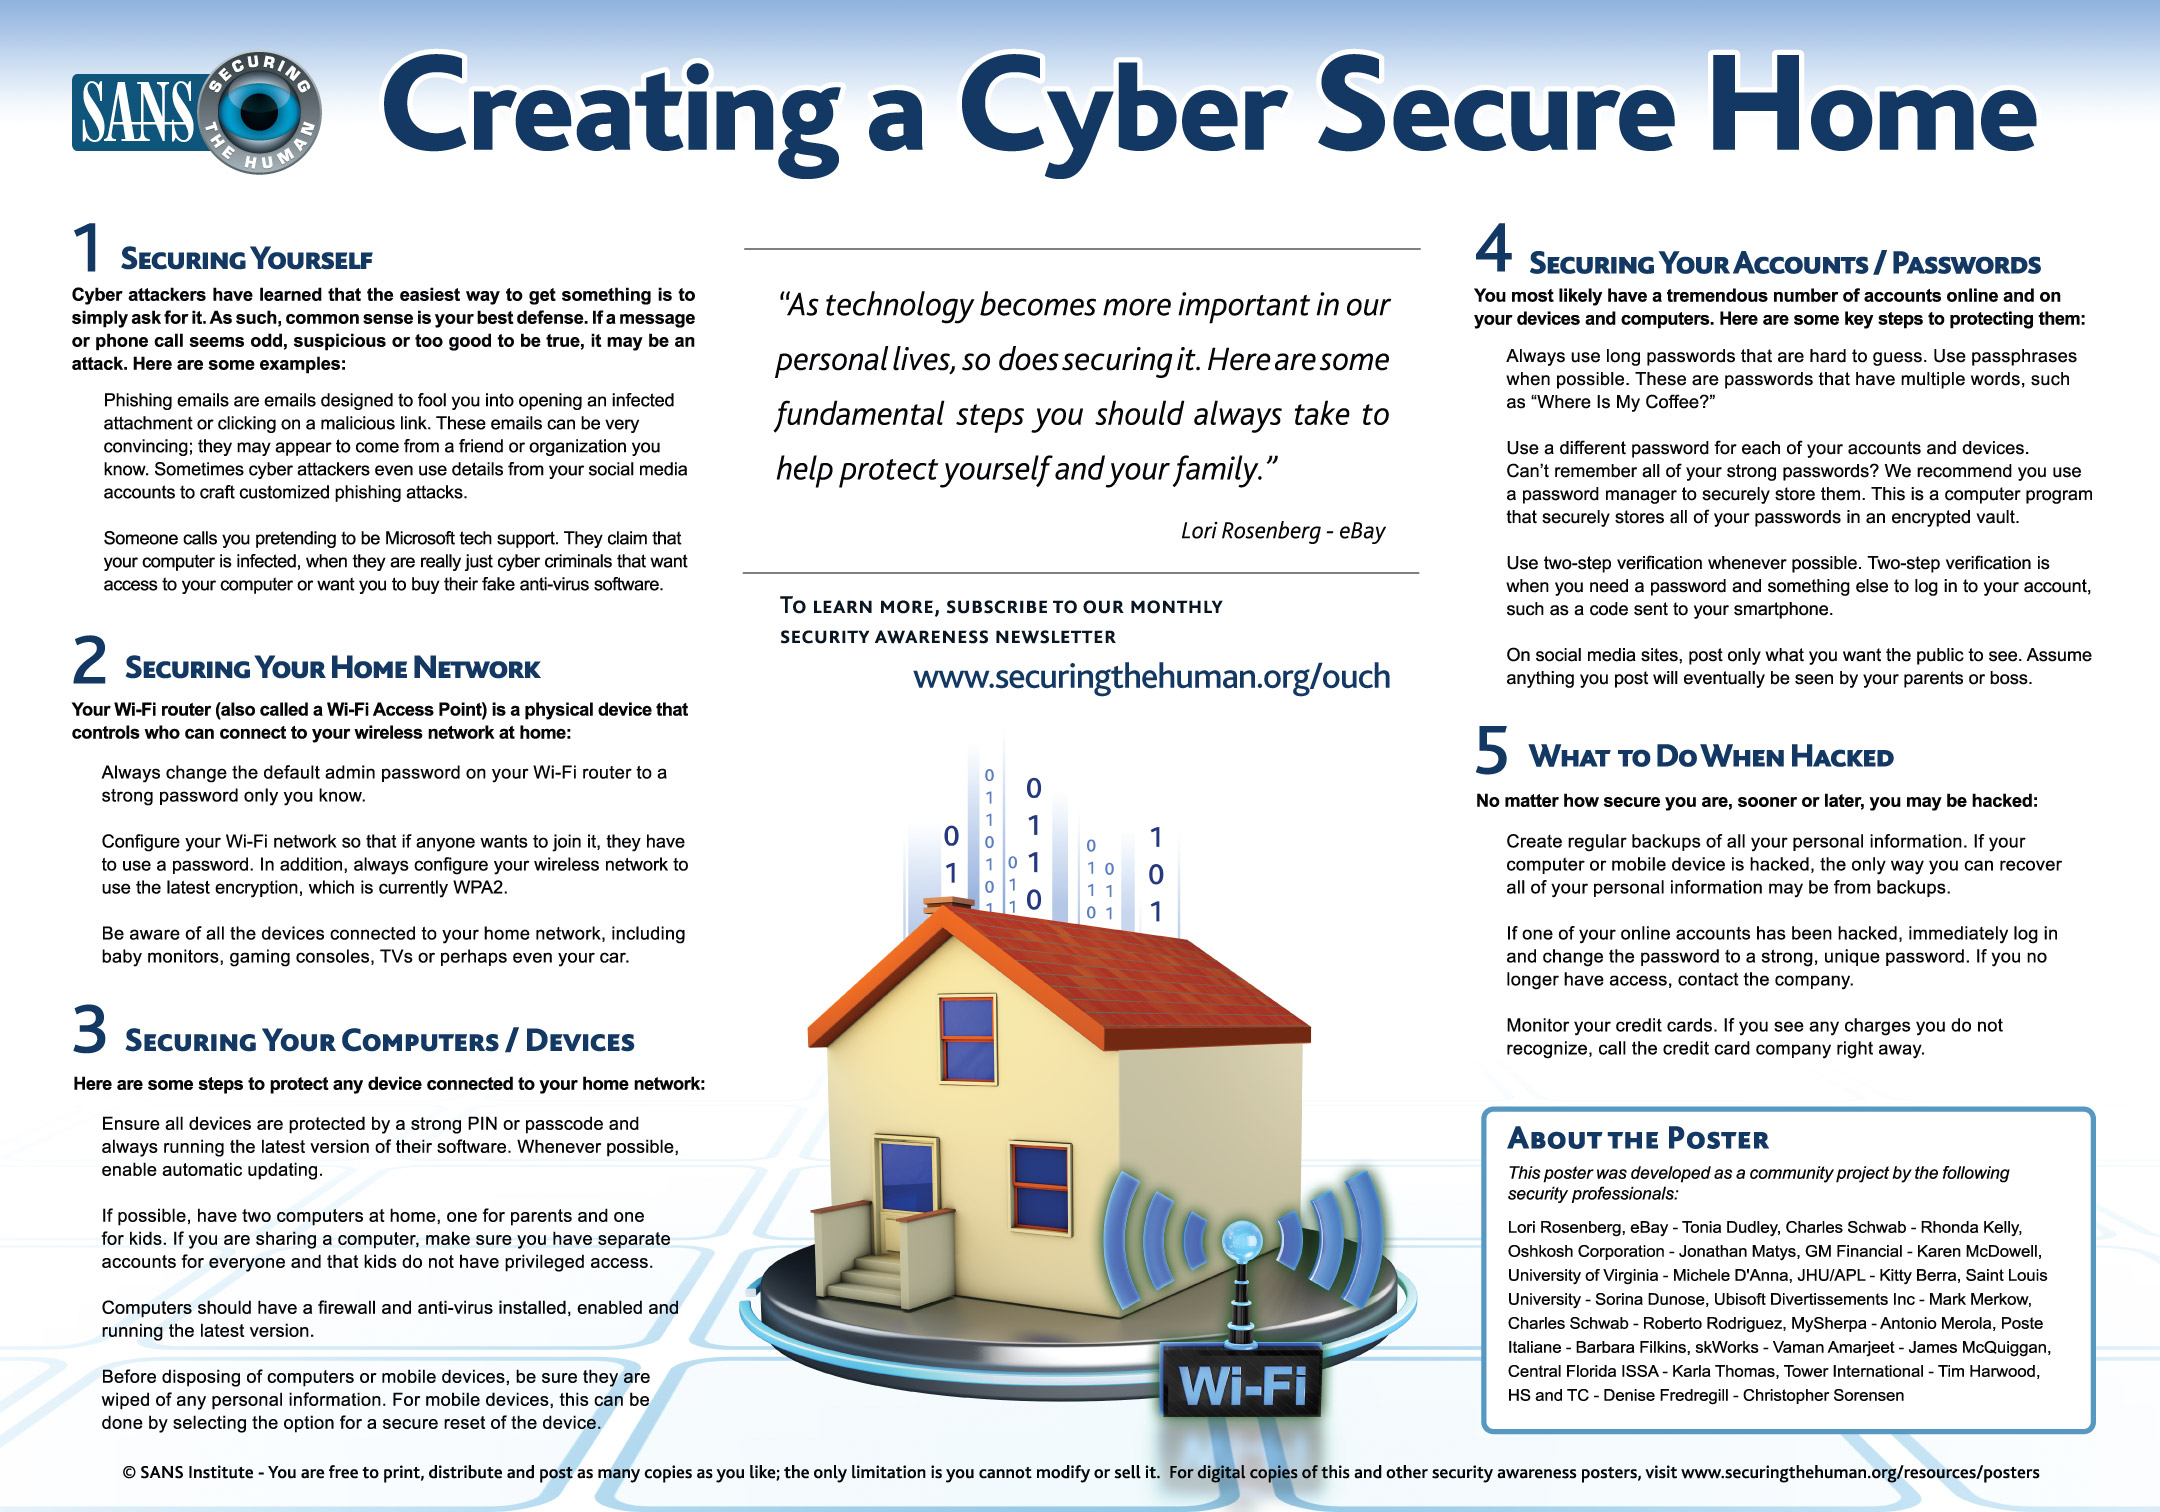 Cyber Security Resources for Kids - St. Louis Dad